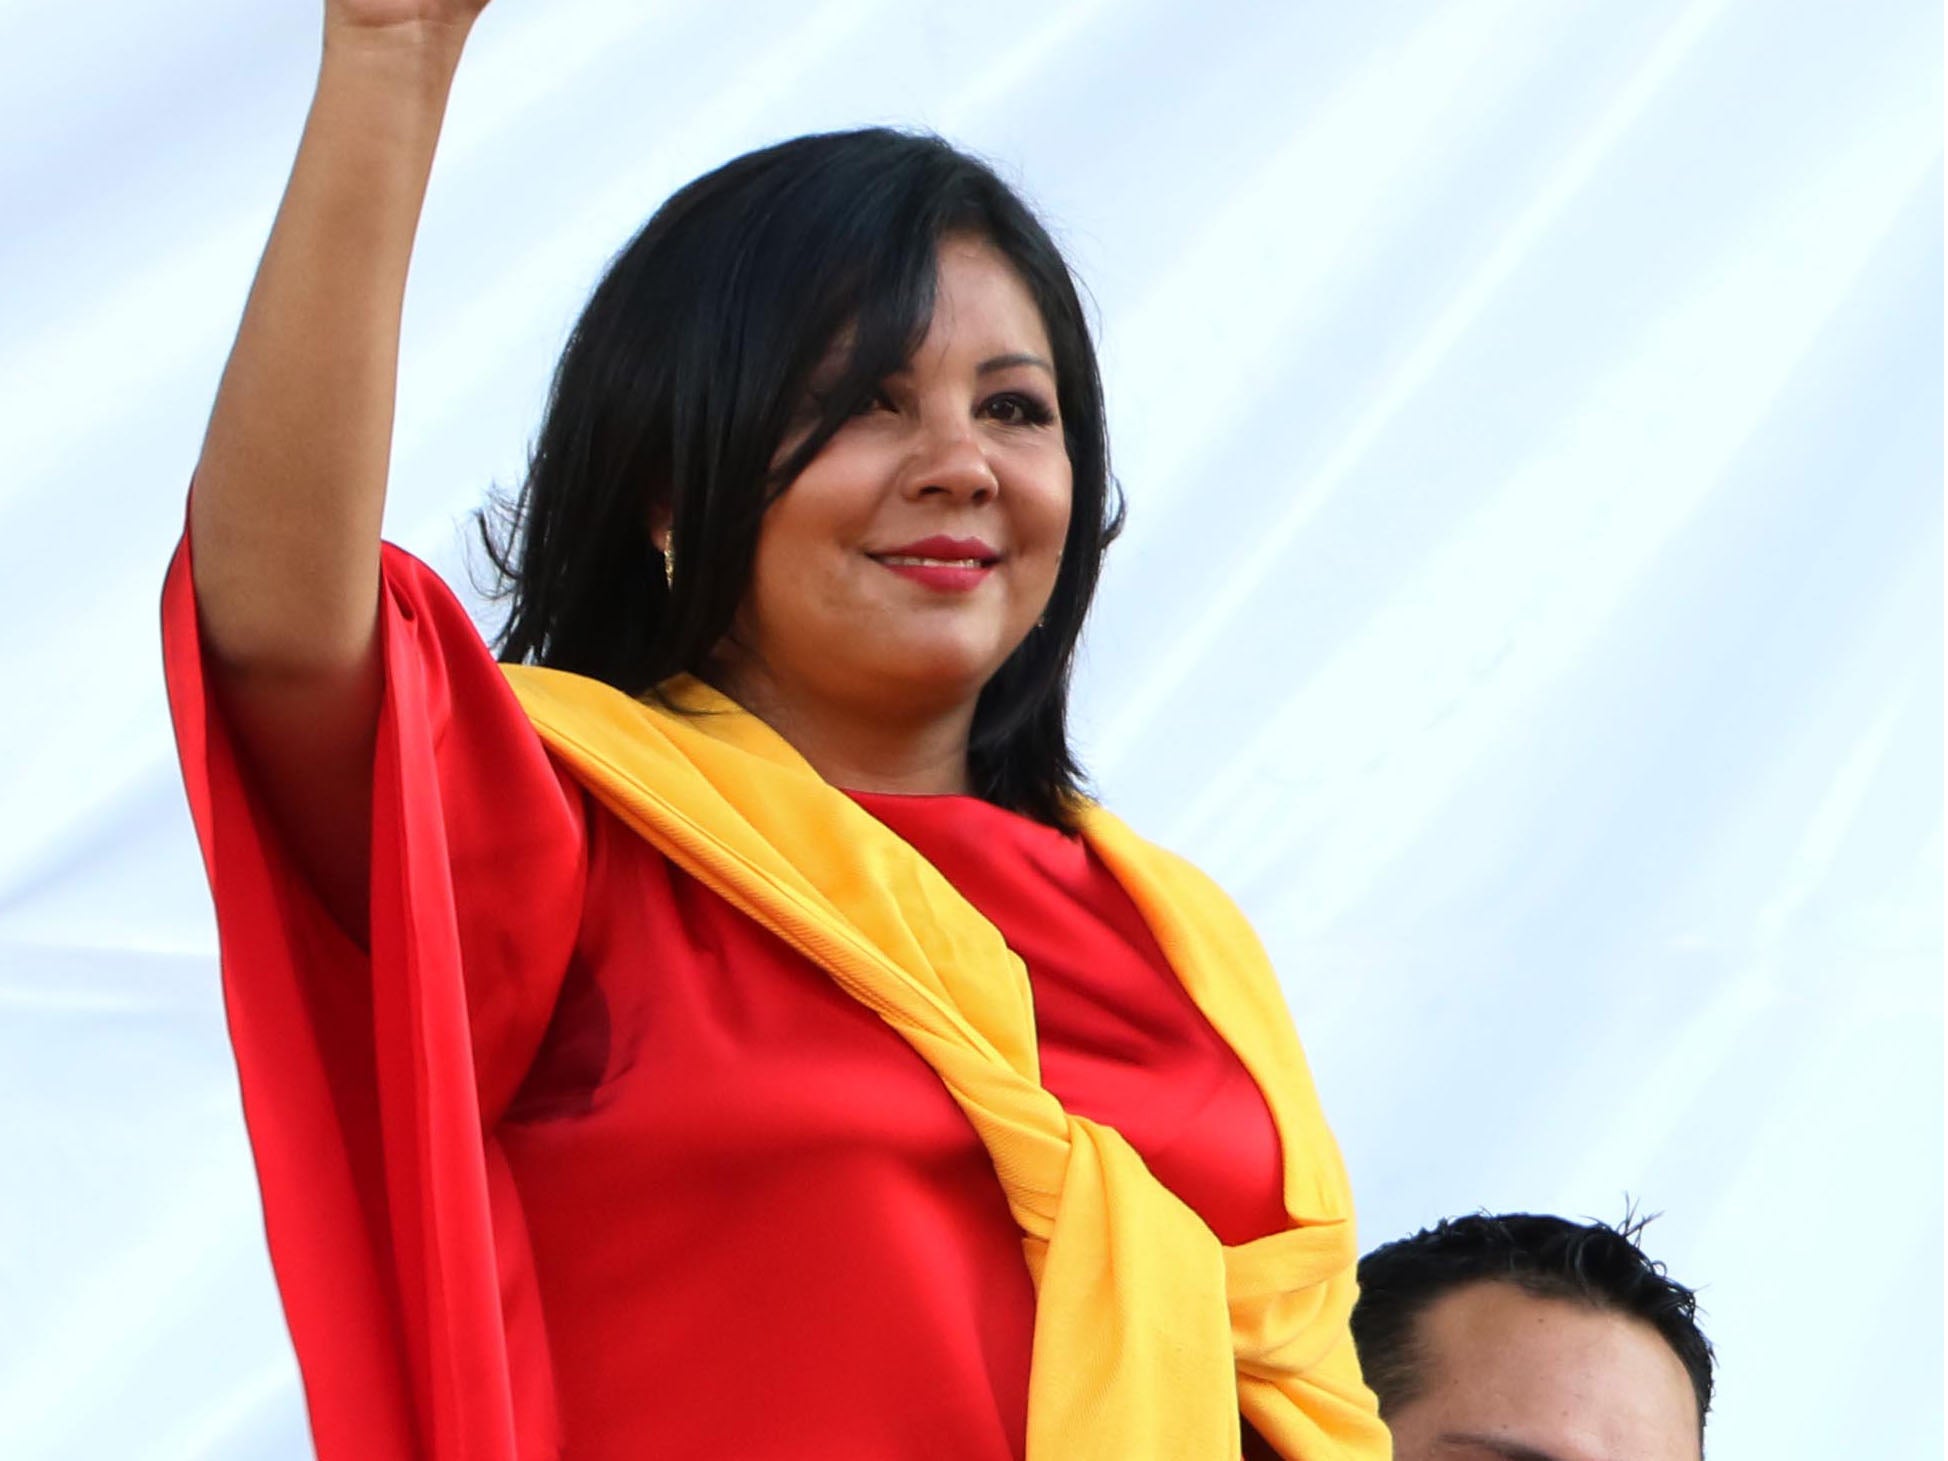 Gisela Mota waves during her swearing in ceremony as mayor of Temixco, Morelos State, Mexico